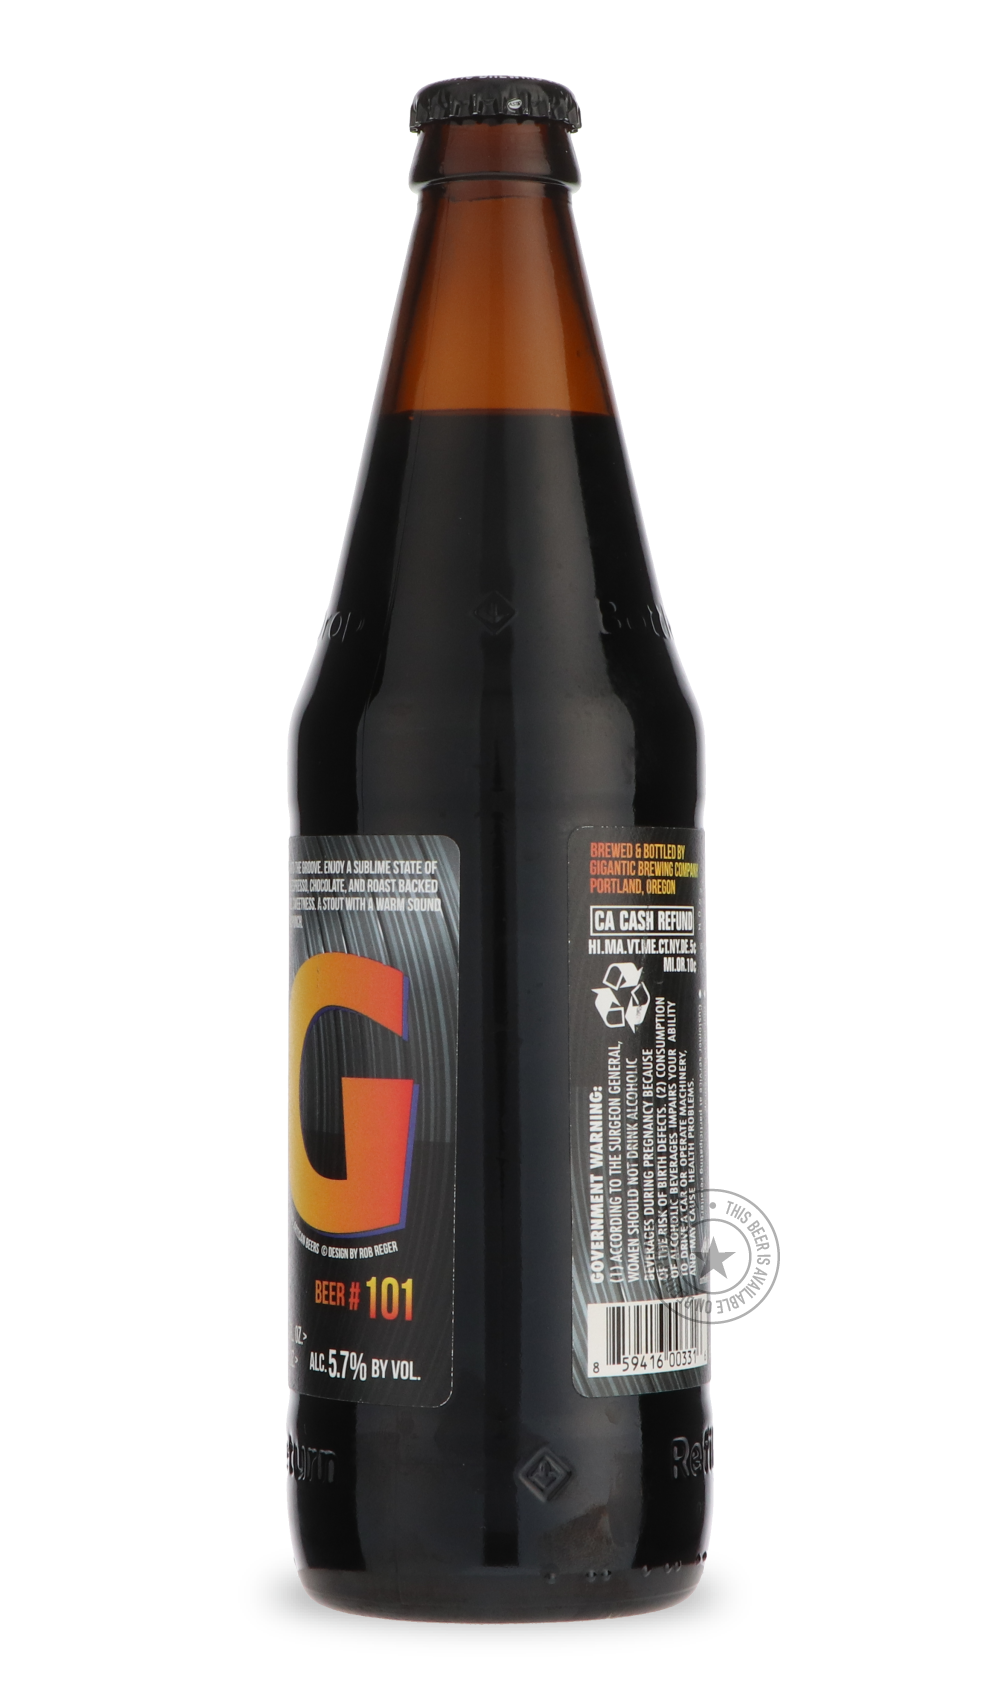 -Gigantic- LP Stout-Stout & Porter- Only @ Beer Republic - The best online beer store for American & Canadian craft beer - Buy beer online from the USA and Canada - Bier online kopen - Amerikaans bier kopen - Craft beer store - Craft beer kopen - Amerikanisch bier kaufen - Bier online kaufen - Acheter biere online - IPA - Stout - Porter - New England IPA - Hazy IPA - Imperial Stout - Barrel Aged - Barrel Aged Imperial Stout - Brown - Dark beer - Blond - Blonde - Pilsner - Lager - Wheat - Weizen - Amber - Ba